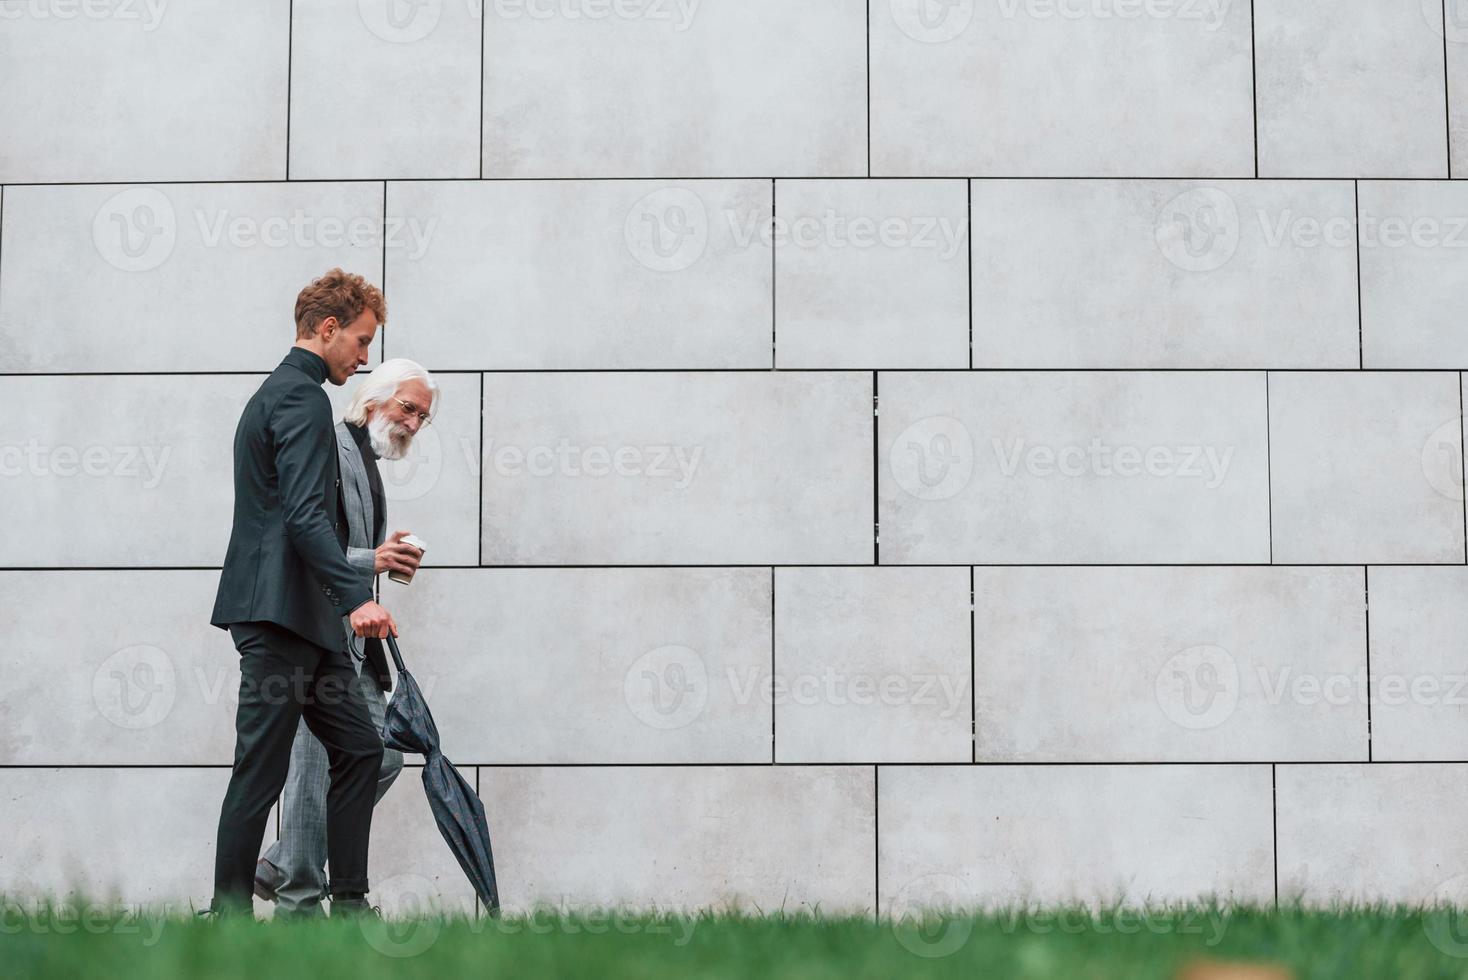 Walking on grass near wall. Young guy with senior man in elegant clothes is outdoors together. Conception of business photo